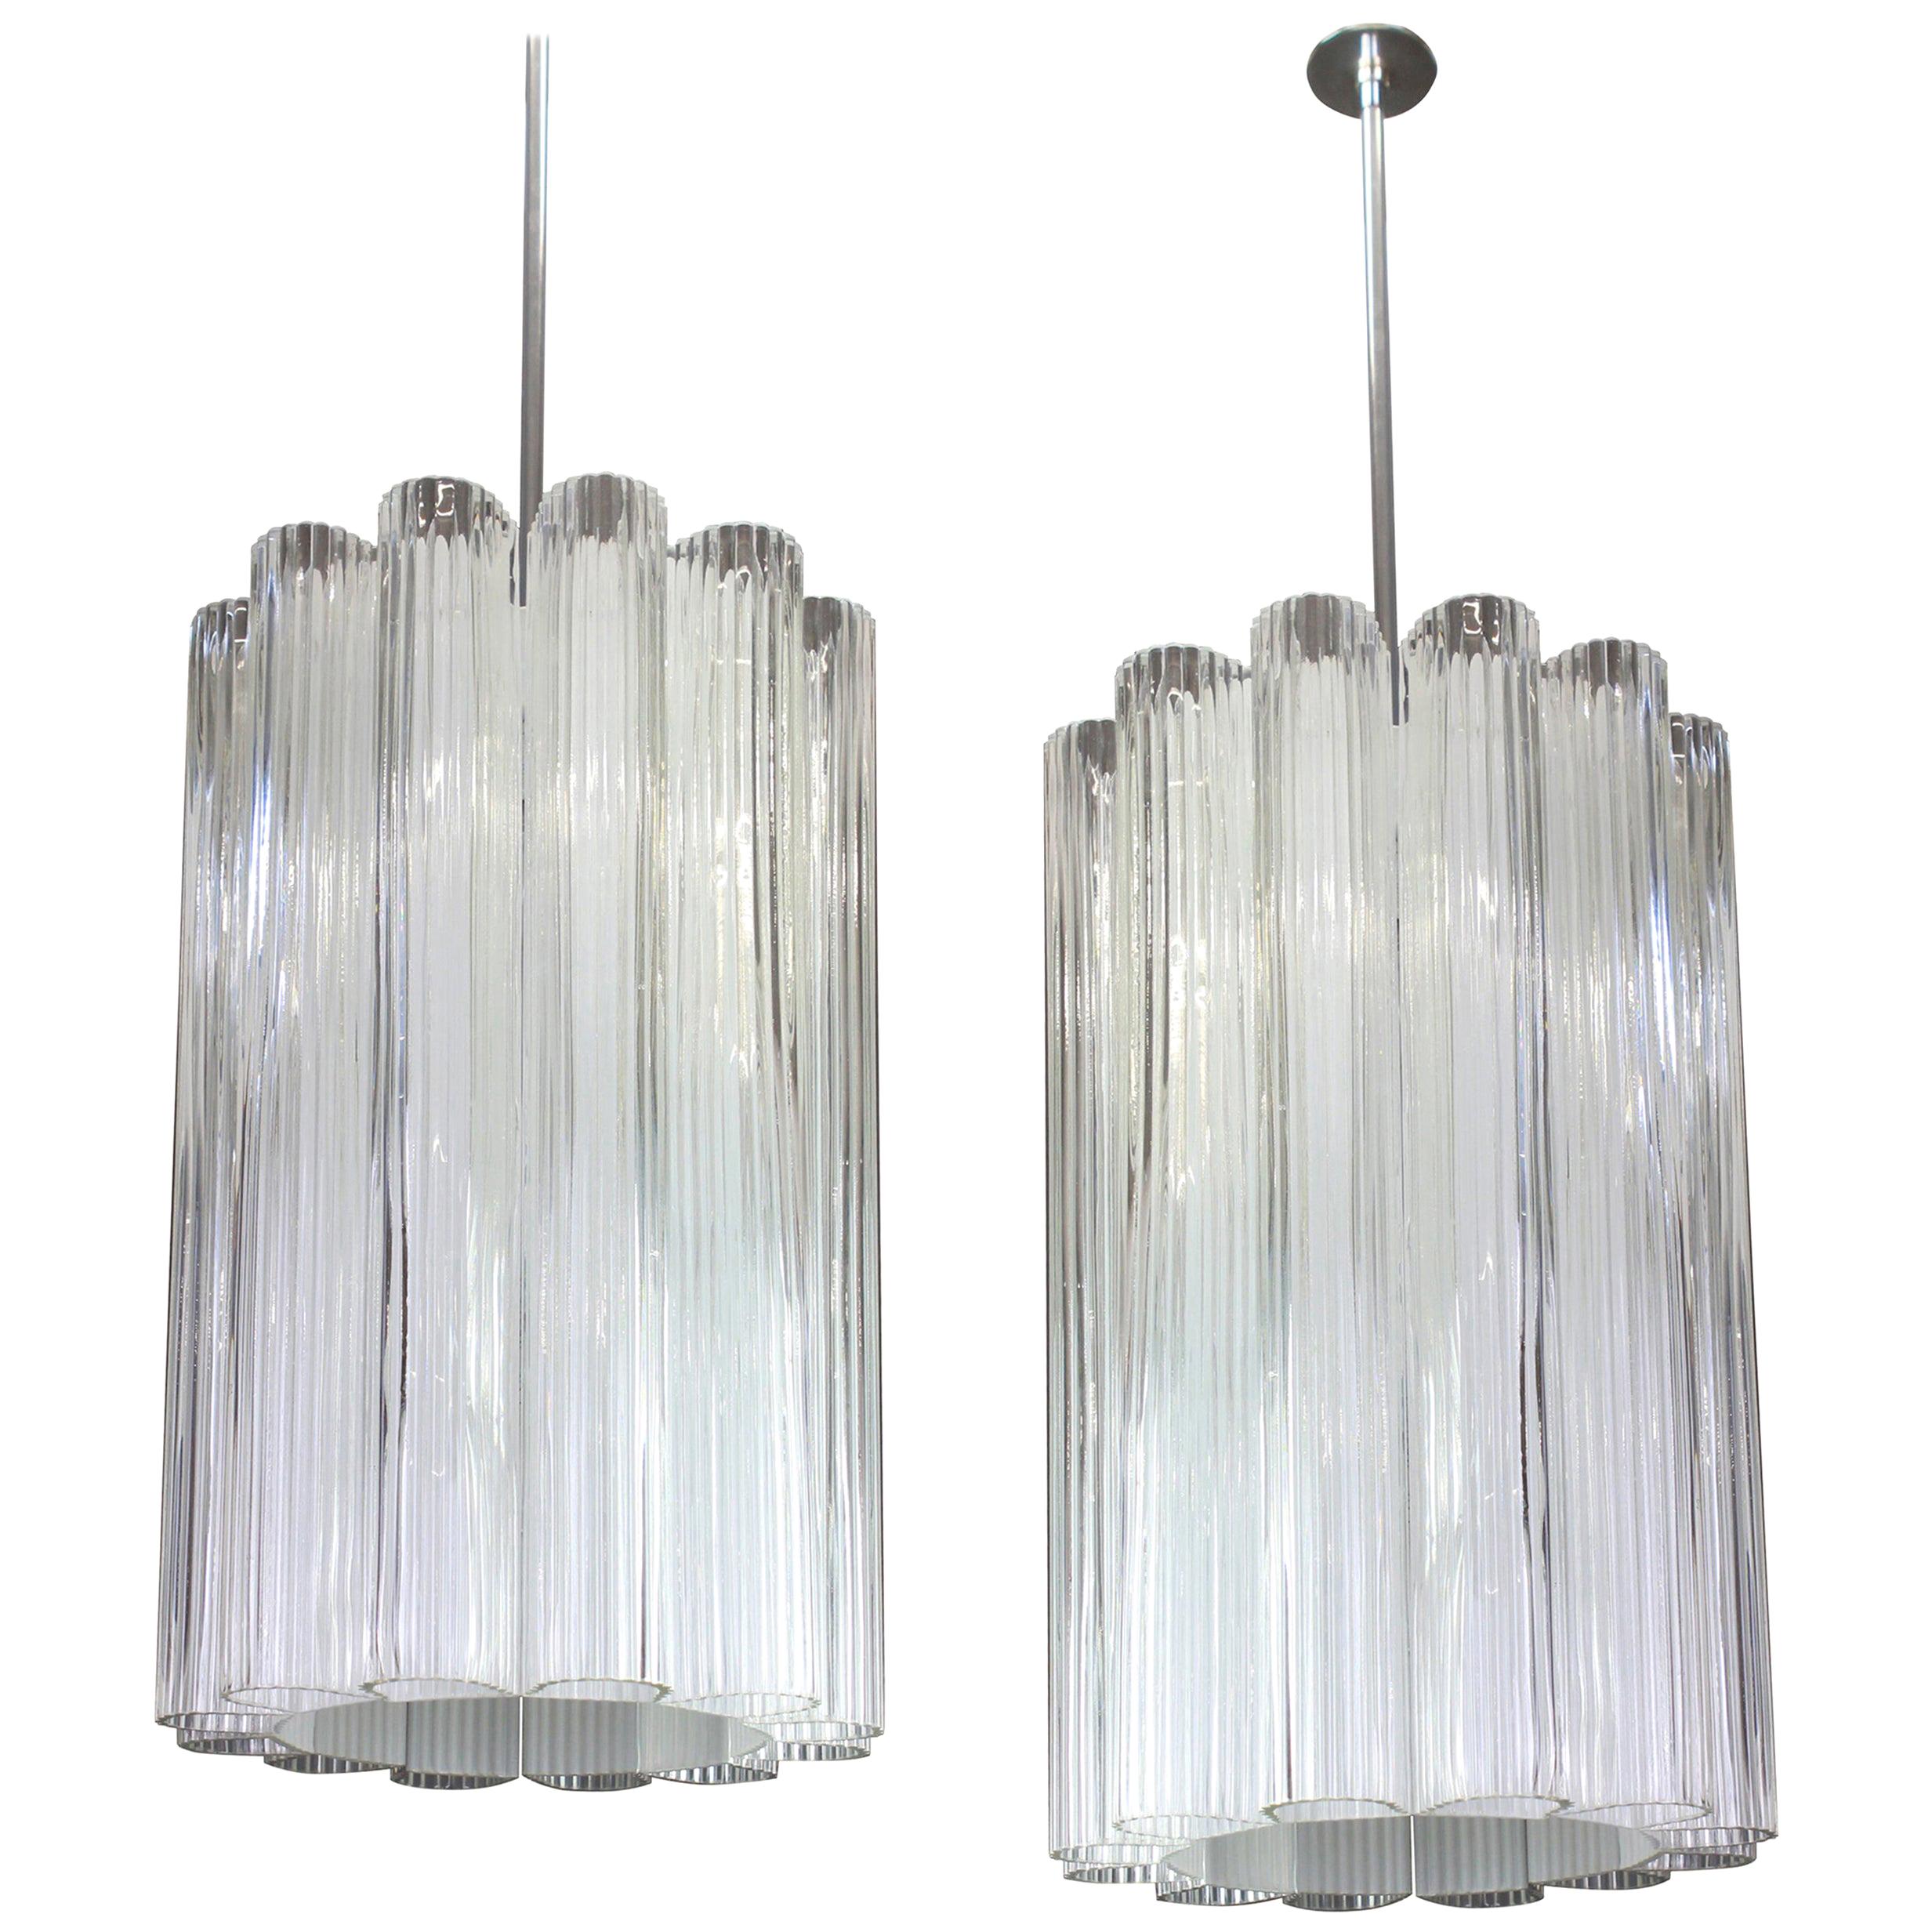 1 of 2 Cylindrical Pendant Fixture with Crystal Glass by Doria, Germany, 1960s